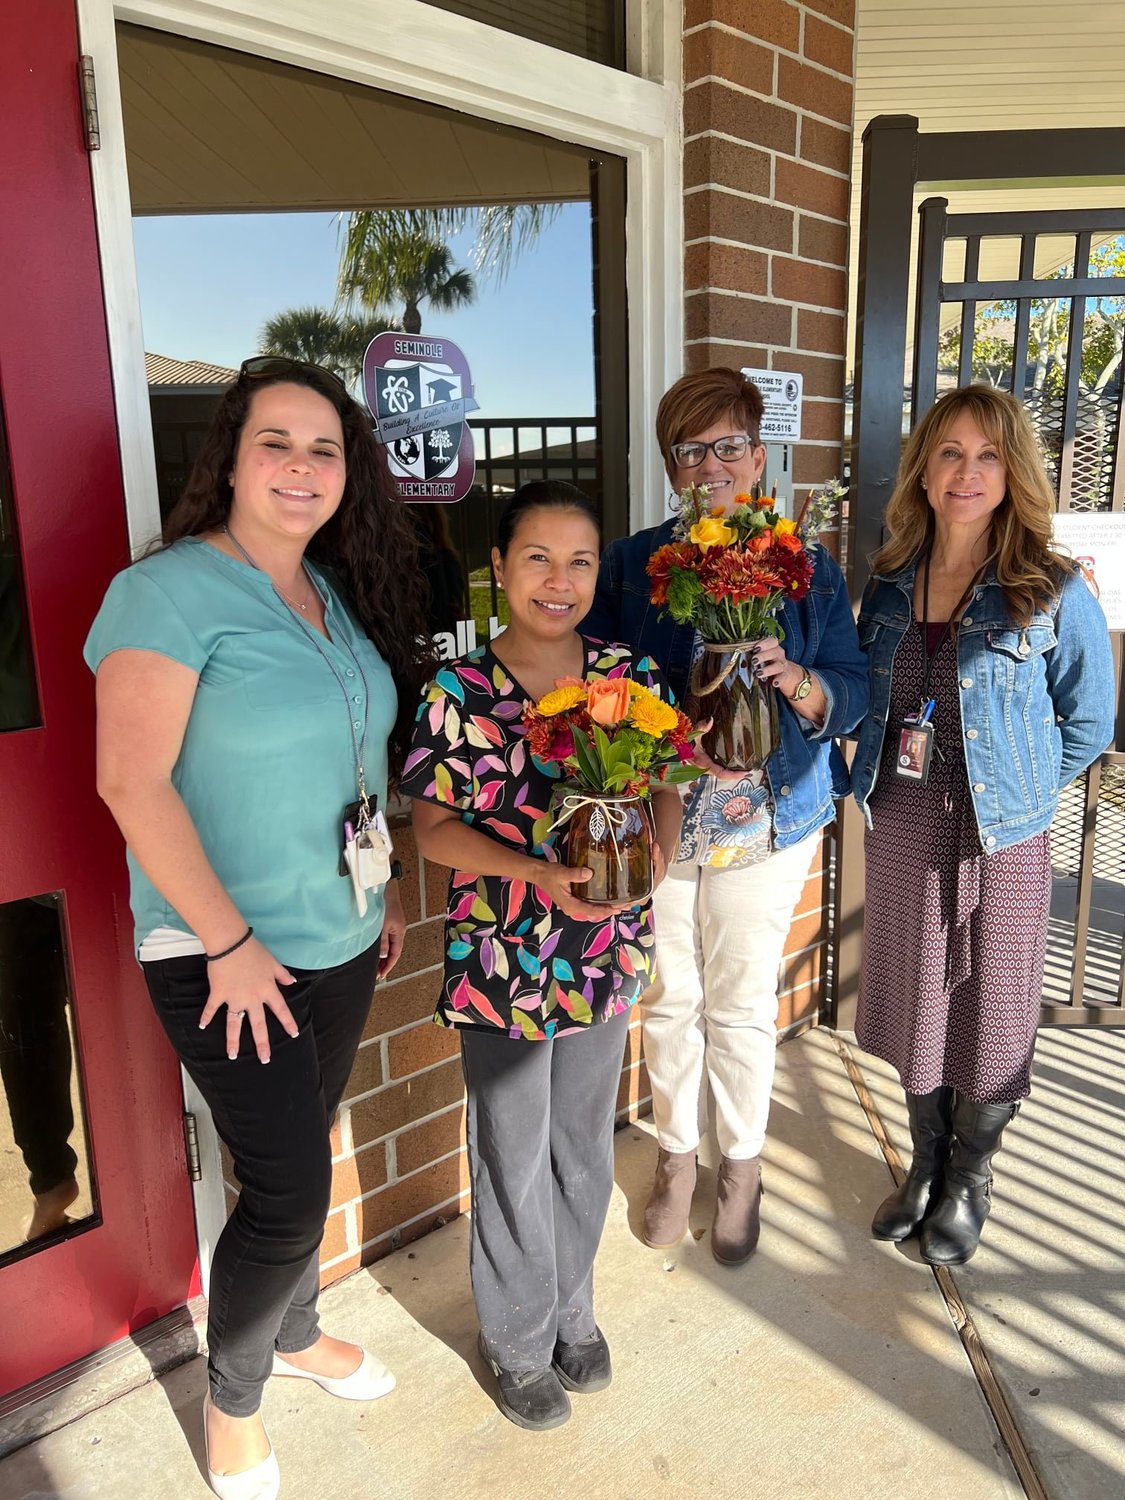 Seminole Elementary School announces teacher of the year Pamela Gaucin and school related employee of the year Leda Whitlon. Pictured left to right are assistant Sonya Vandermolen, Leda Whitlon, Pamela Gaucin and principal Dr. Robyn Ziolkowski.